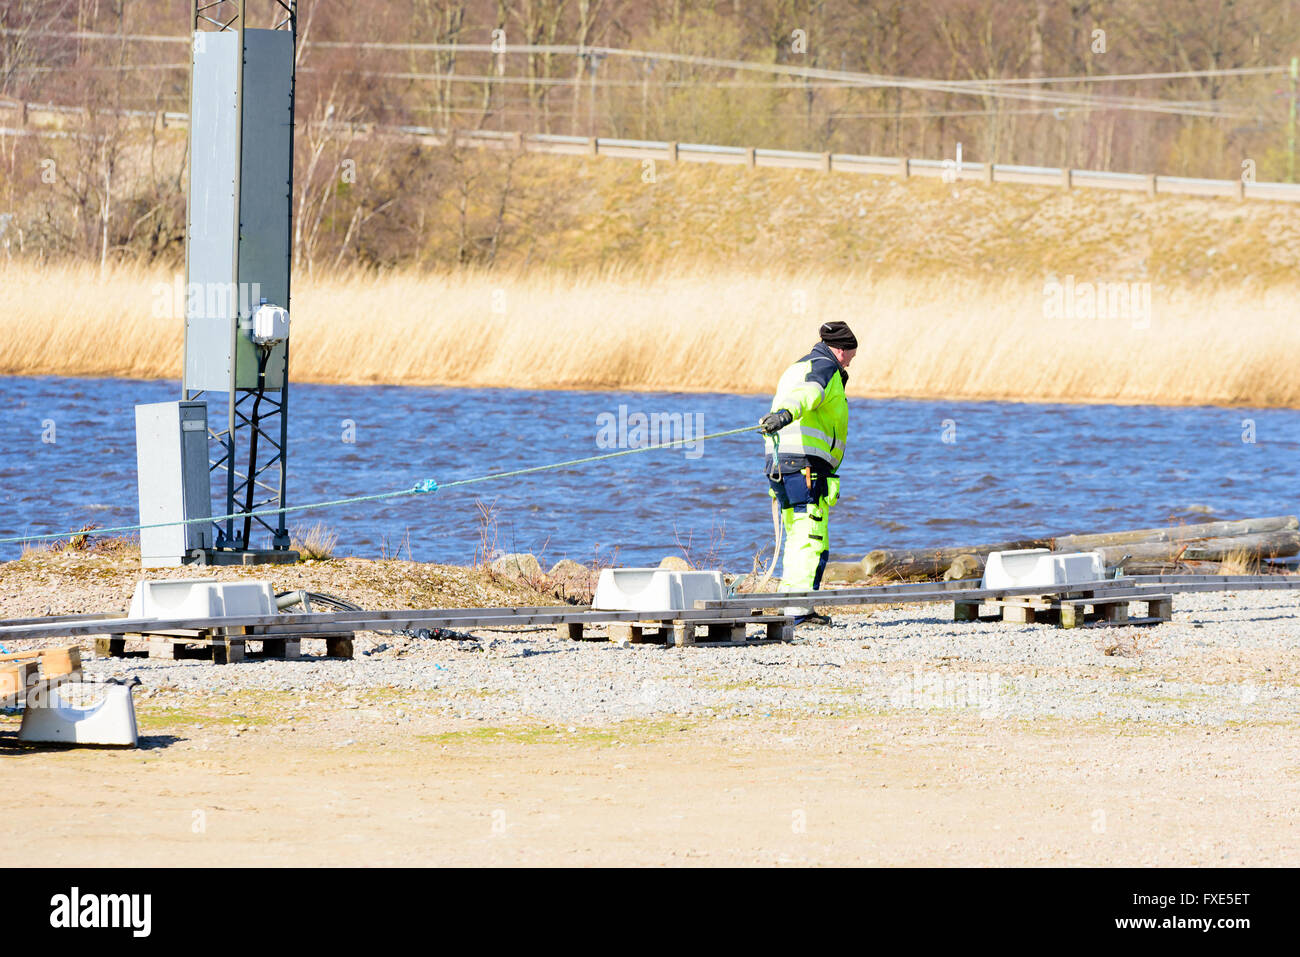 Karlskrona, Sweden - April 7, 2016: Assembly of underwater sewage pipeline in public area. Here a man is pulling out some line t Stock Photo